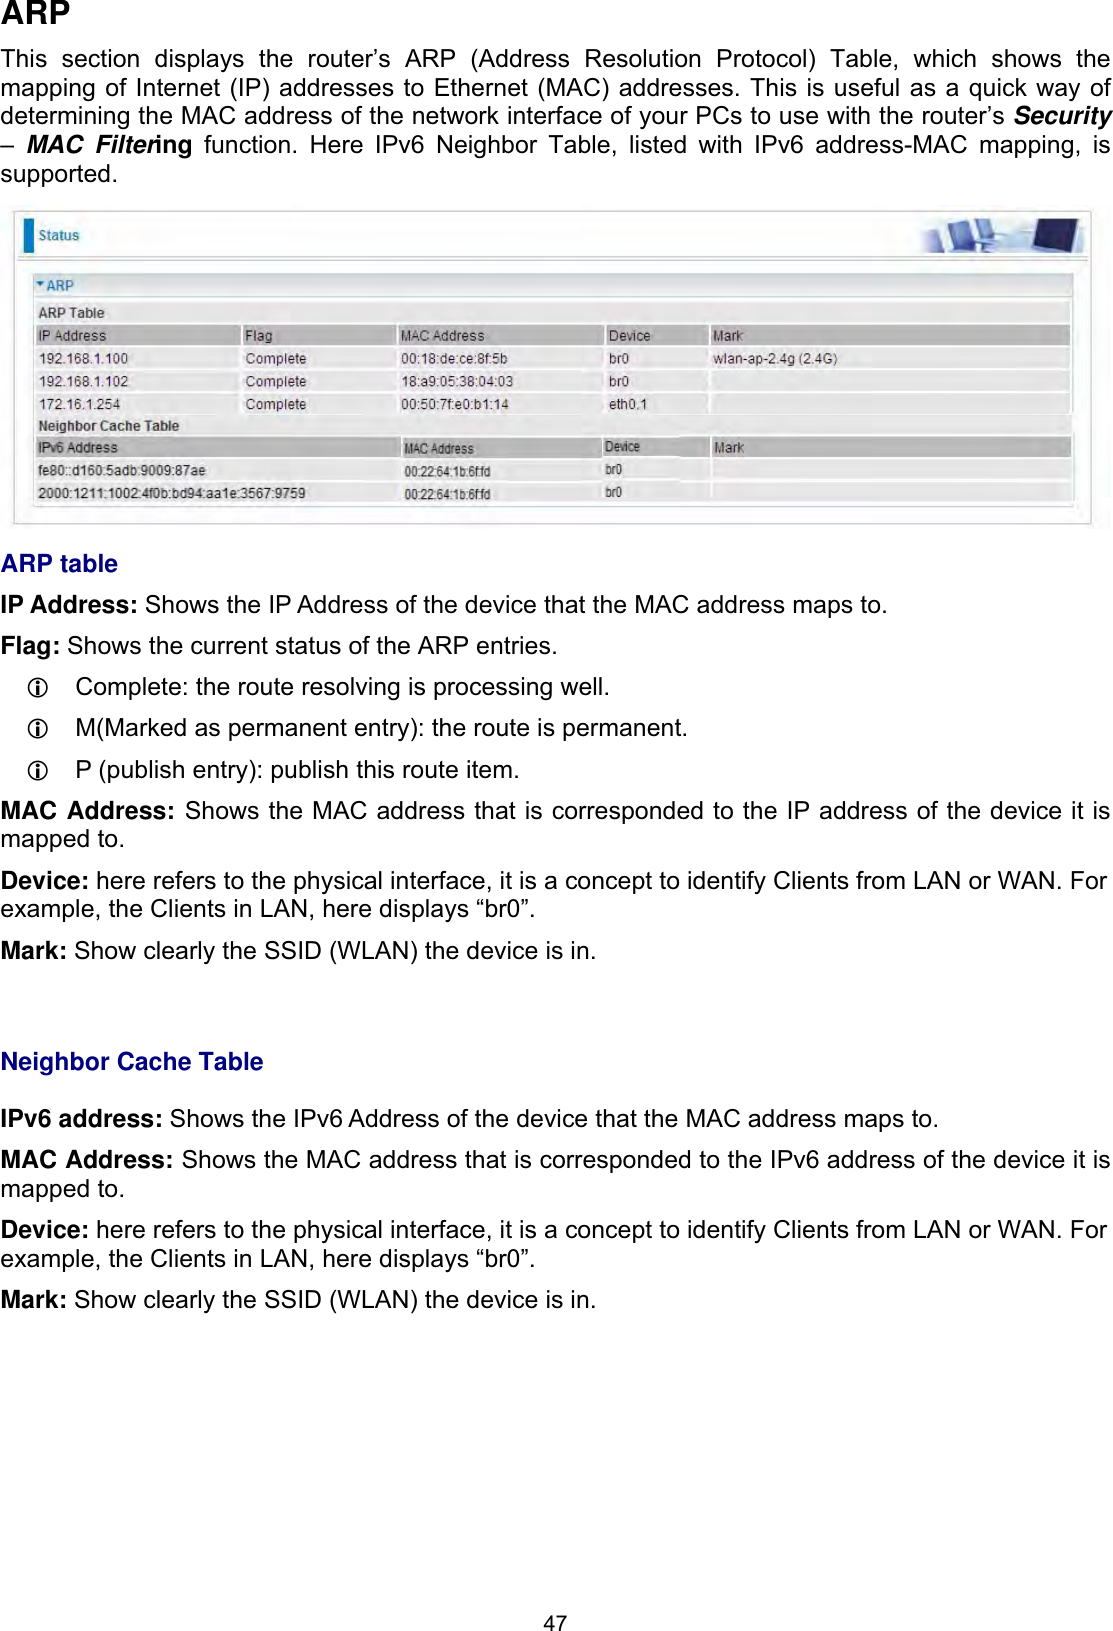 47ARPThis section displays the router’s ARP (Address Resolution Protocol) Table, which shows the mapping of Internet (IP) addresses to Ethernet (MAC) addresses. This is useful as a quick way of determining the MAC address of the network interface of your PCs to use with the router’s Security–MAC Filtering function. Here IPv6 Neighbor Table, listed with IPv6 address-MAC mapping, is supported.ARP table IP Address: Shows the IP Address of the device that the MAC address maps to. Flag: Shows the current status of the ARP entries. L  Complete: the route resolving is processing well. L  M(Marked as permanent entry): the route is permanent. L  P (publish entry): publish this route item. MAC Address: Shows the MAC address that is corresponded to the IP address of the device it is mapped to. Device: here refers to the physical interface, it is a concept to identify Clients from LAN or WAN. For example, the Clients in LAN, here displays “br0”. Mark: Show clearly the SSID (WLAN) the device is in. Neighbor Cache Table IPv6 address: Shows the IPv6 Address of the device that the MAC address maps to. MAC Address: Shows the MAC address that is corresponded to the IPv6 address of the device it is mapped to. Device: here refers to the physical interface, it is a concept to identify Clients from LAN or WAN. For example, the Clients in LAN, here displays “br0”. Mark: Show clearly the SSID (WLAN) the device is in. 